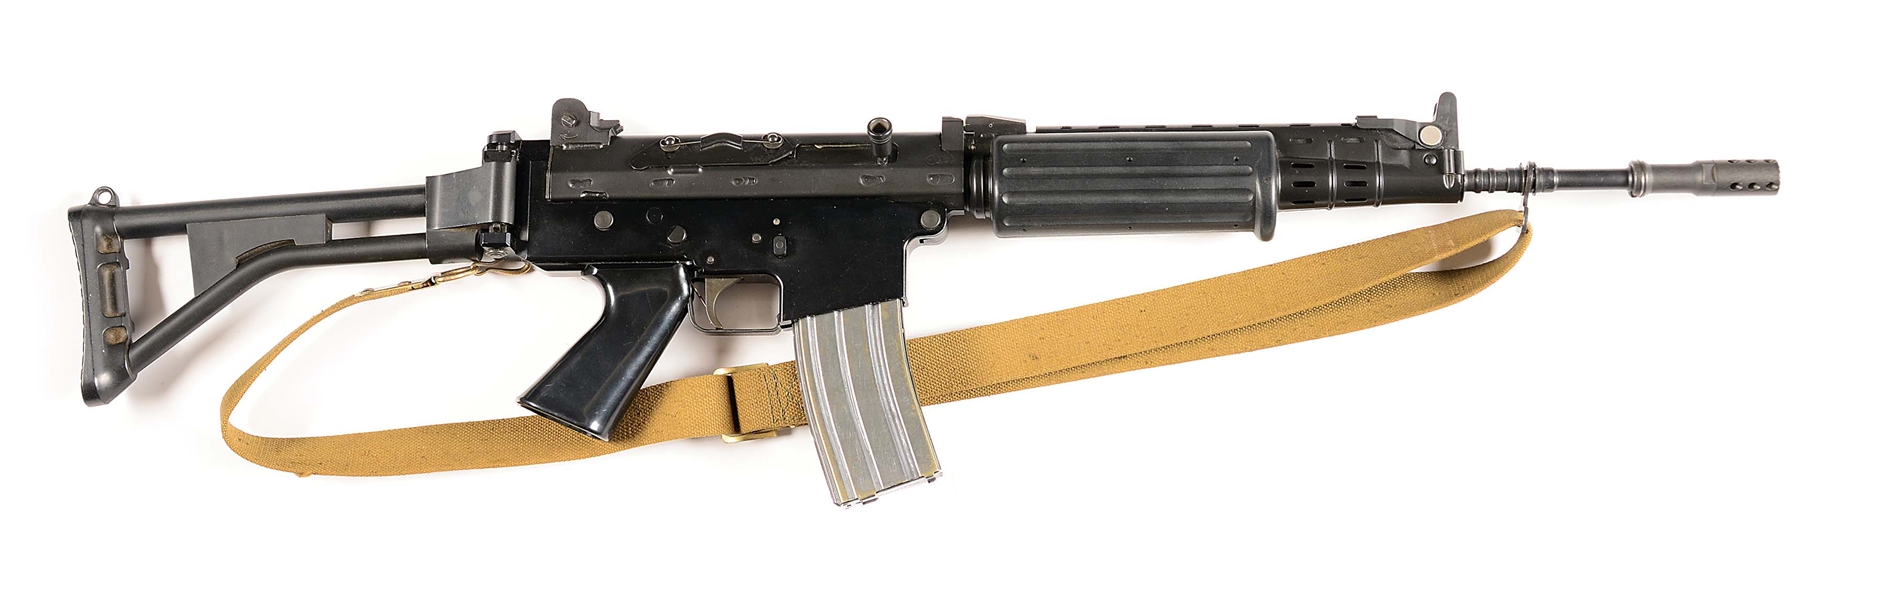 (N) FOLDING STOCK FABRIQUE NATIONALE FN-C HOST GUN WITH S & H ARMS AUTO SEAR MACHINE GUN (FULLY TRANSFERABLE). 